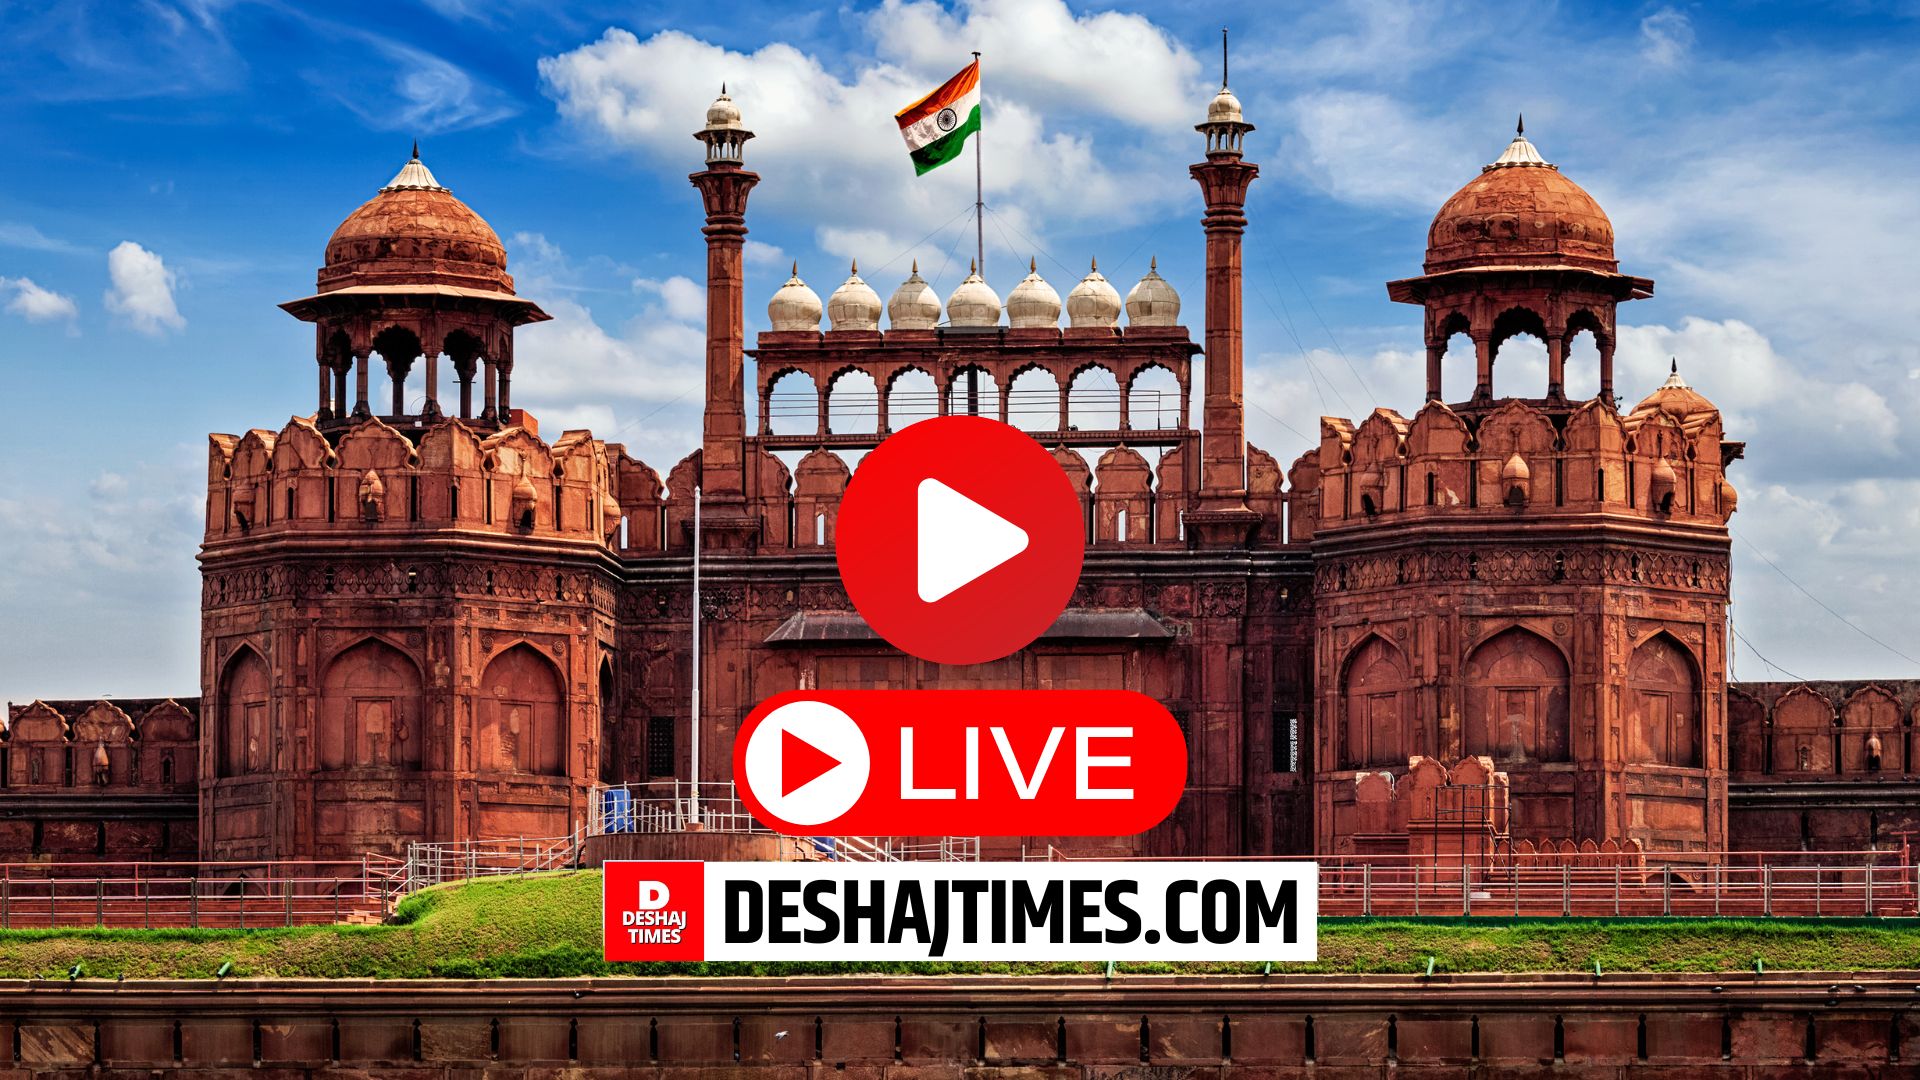 Republic Day Parade Live: घर बैठे यहां देखें Republic Day Parade LIVE. Watch Republic Day Parade 2024 Live Streaming on Doordarshan National. Watch R-Day Parade Live Telecast. Watch Kartavya Path Live | Republic Day Parade 2024: यहां देखें रिपब्लिक डे की परेड...